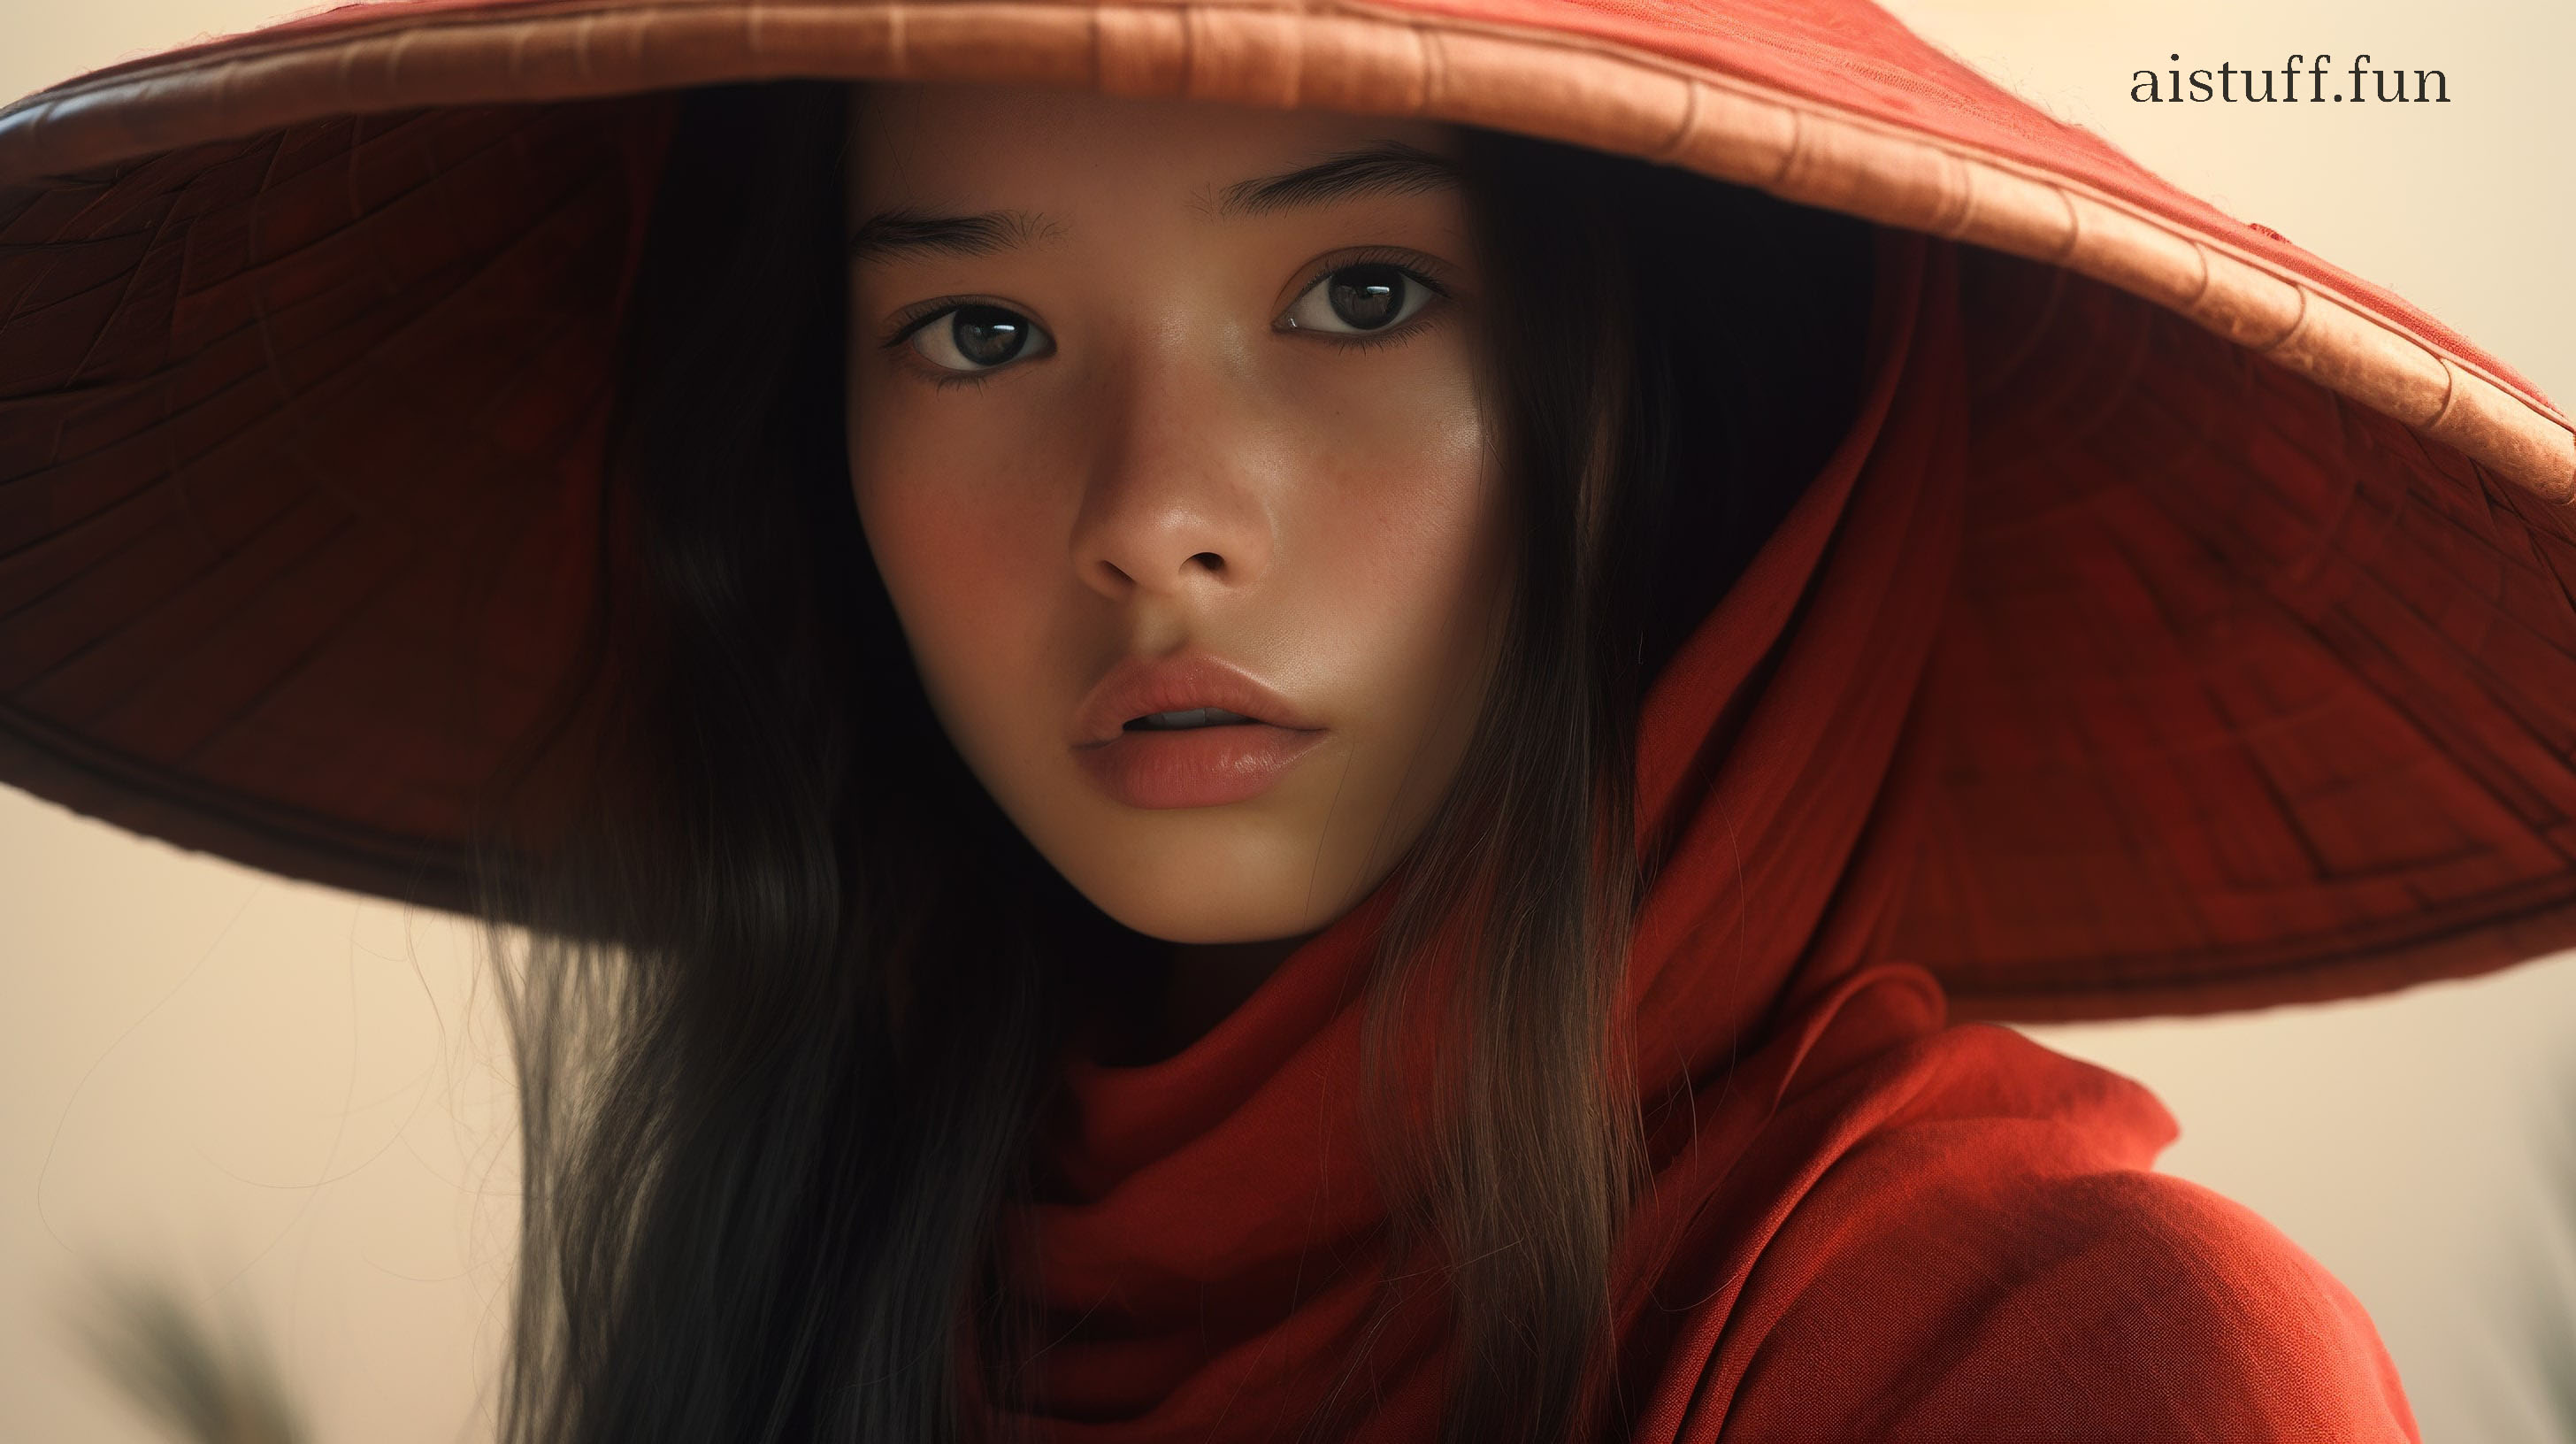 Lovely Asian girl in a wide hat and red cloak